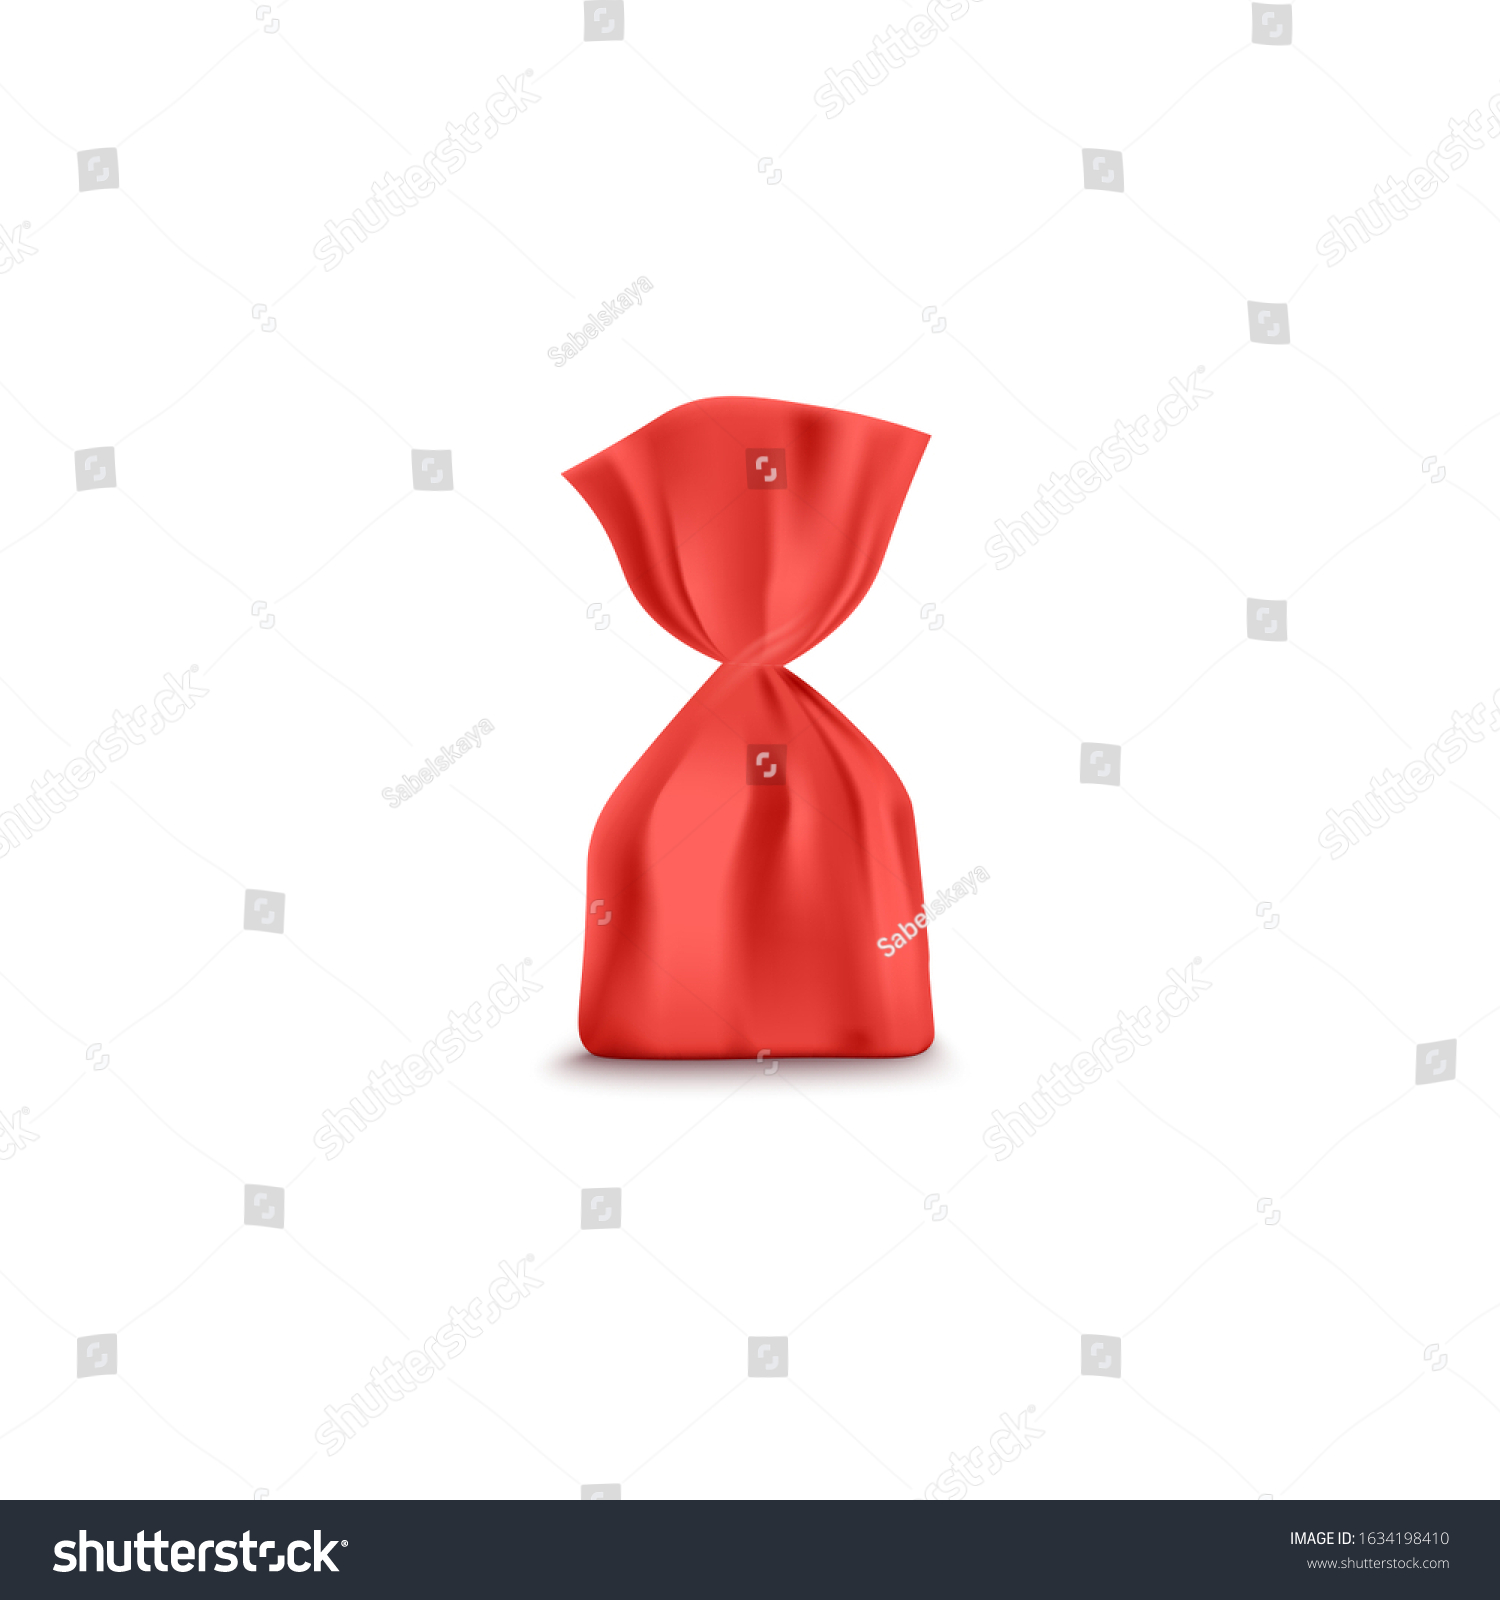 Download Realistic Red Foil Candy Wrapper Mockup Stock Vector Royalty Free 1634198410